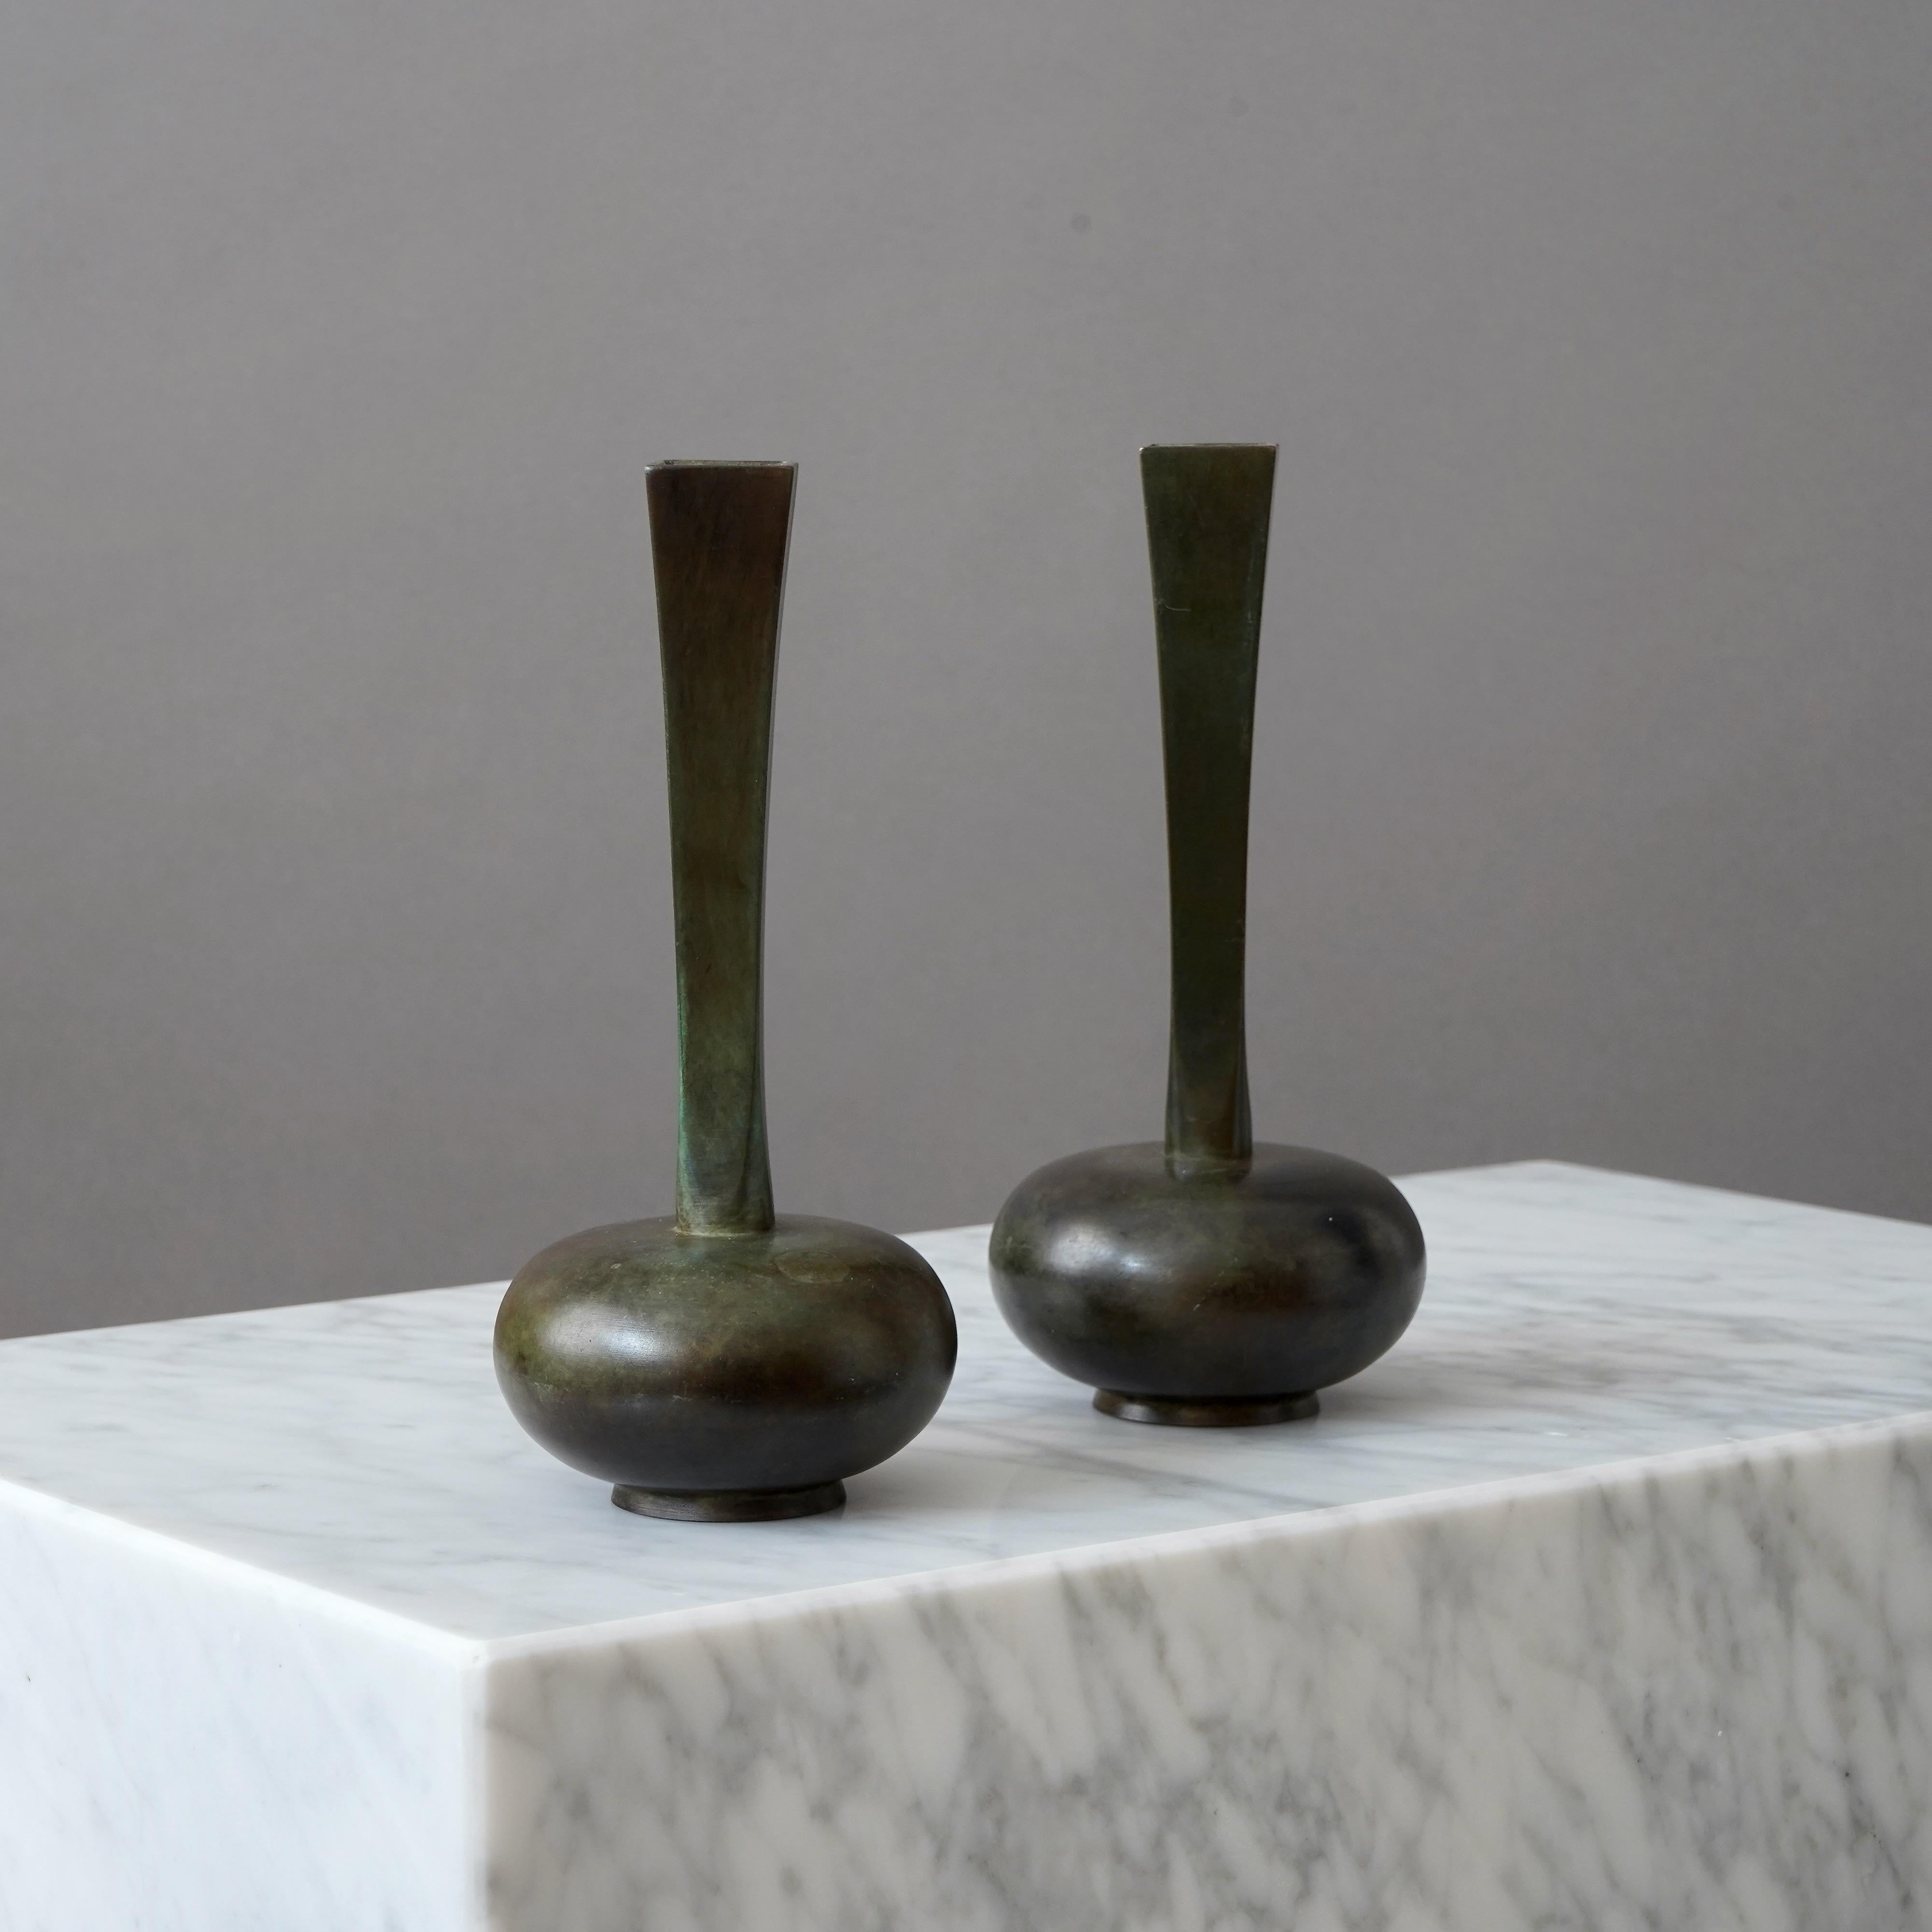 A set of 2 beautiful bronze vases with amazing patina. 
Made by GAB Guldsmedsaktiebolaget, Sweden, 1930s.  

Great condition, with a few light scratches.
Stamped 'BRONS' and makers mark.